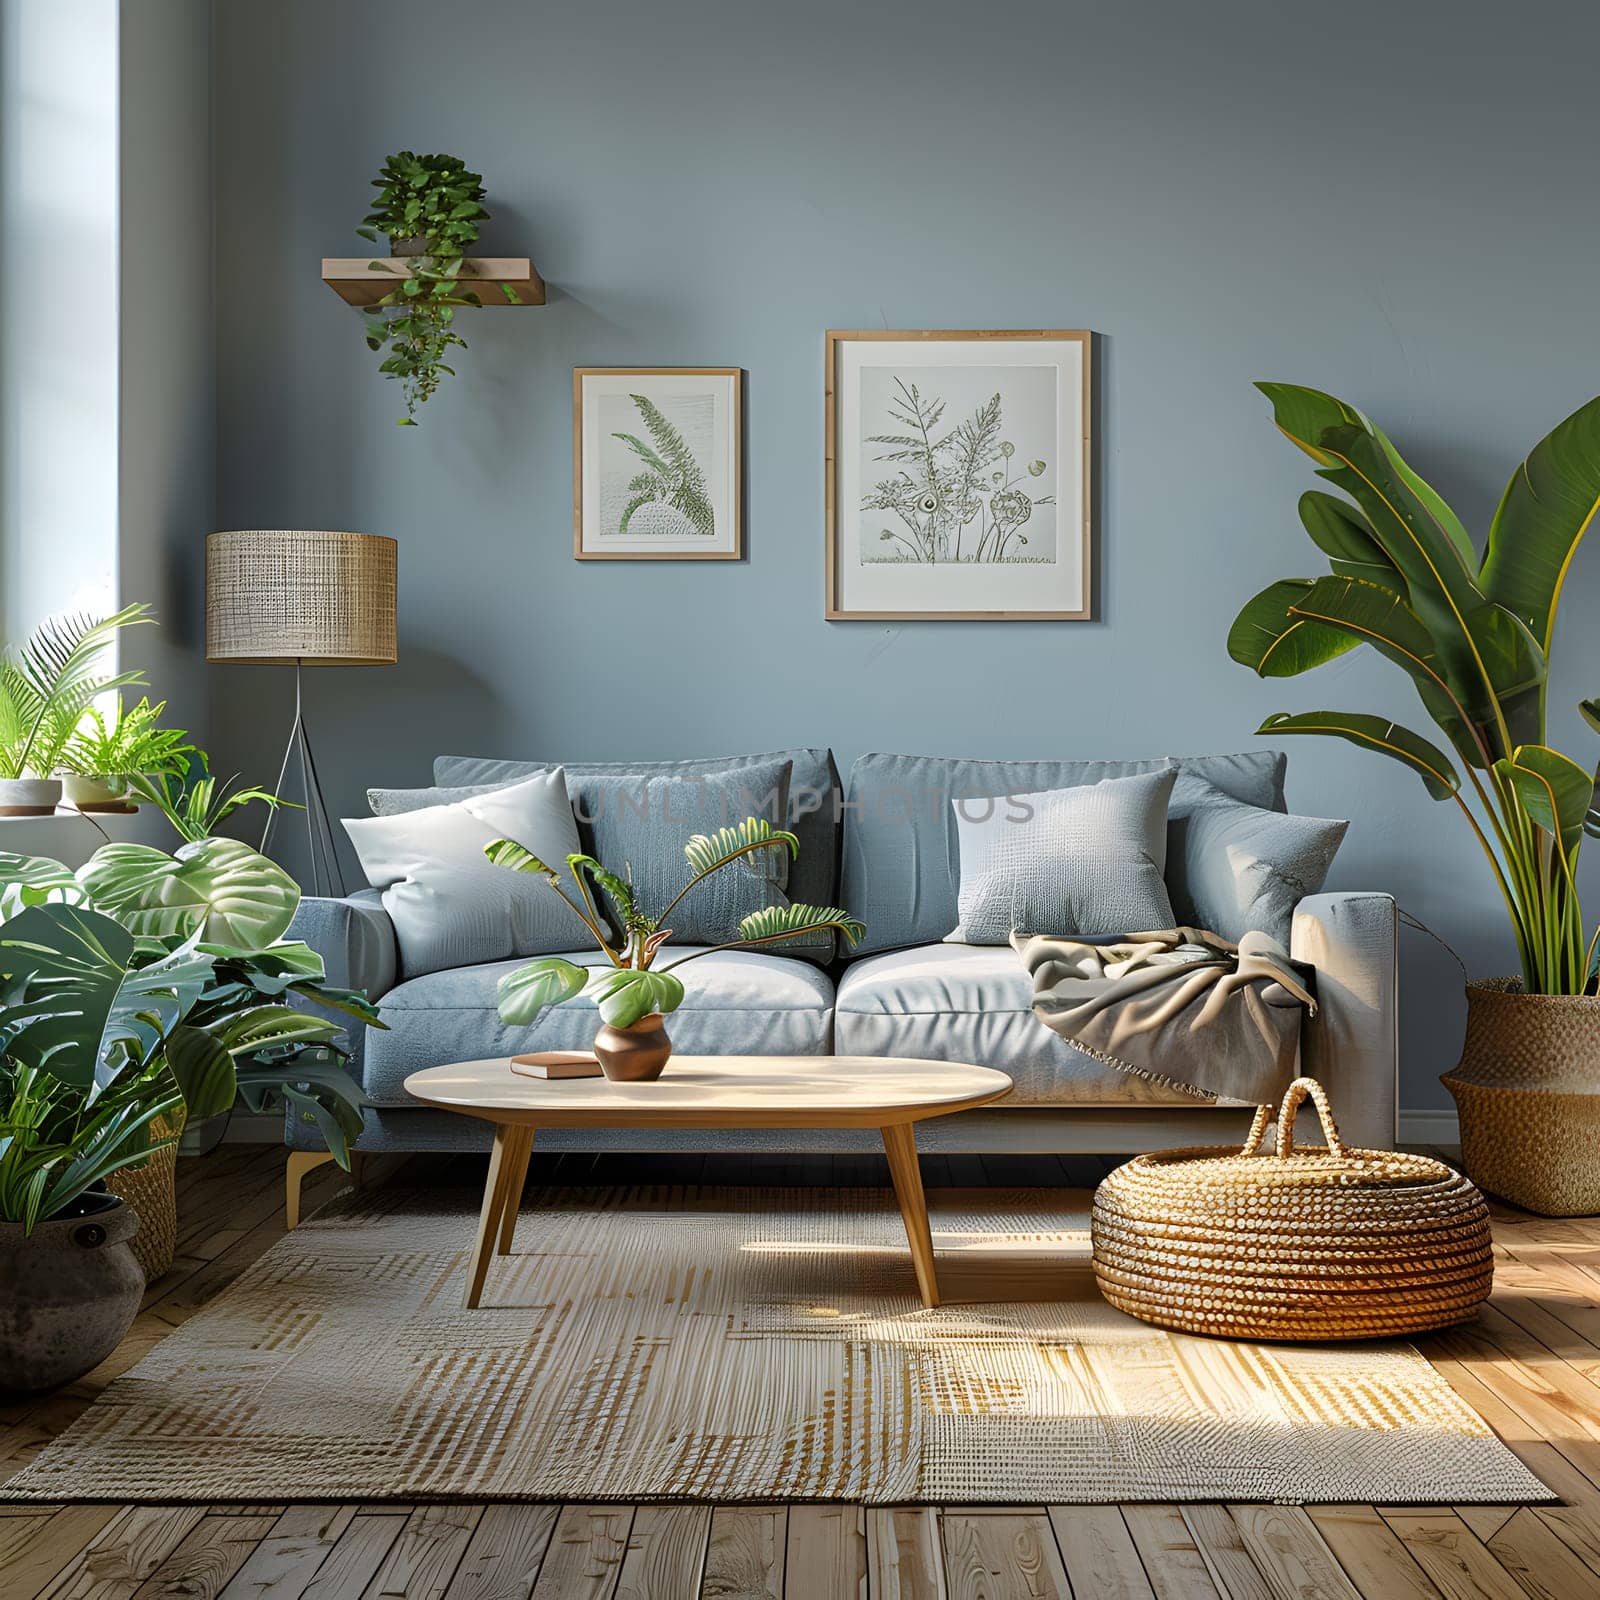 A living room with a cozy couch, coffee table, and vibrant plants. The interior design combines comfort with natural elements to create a welcoming space